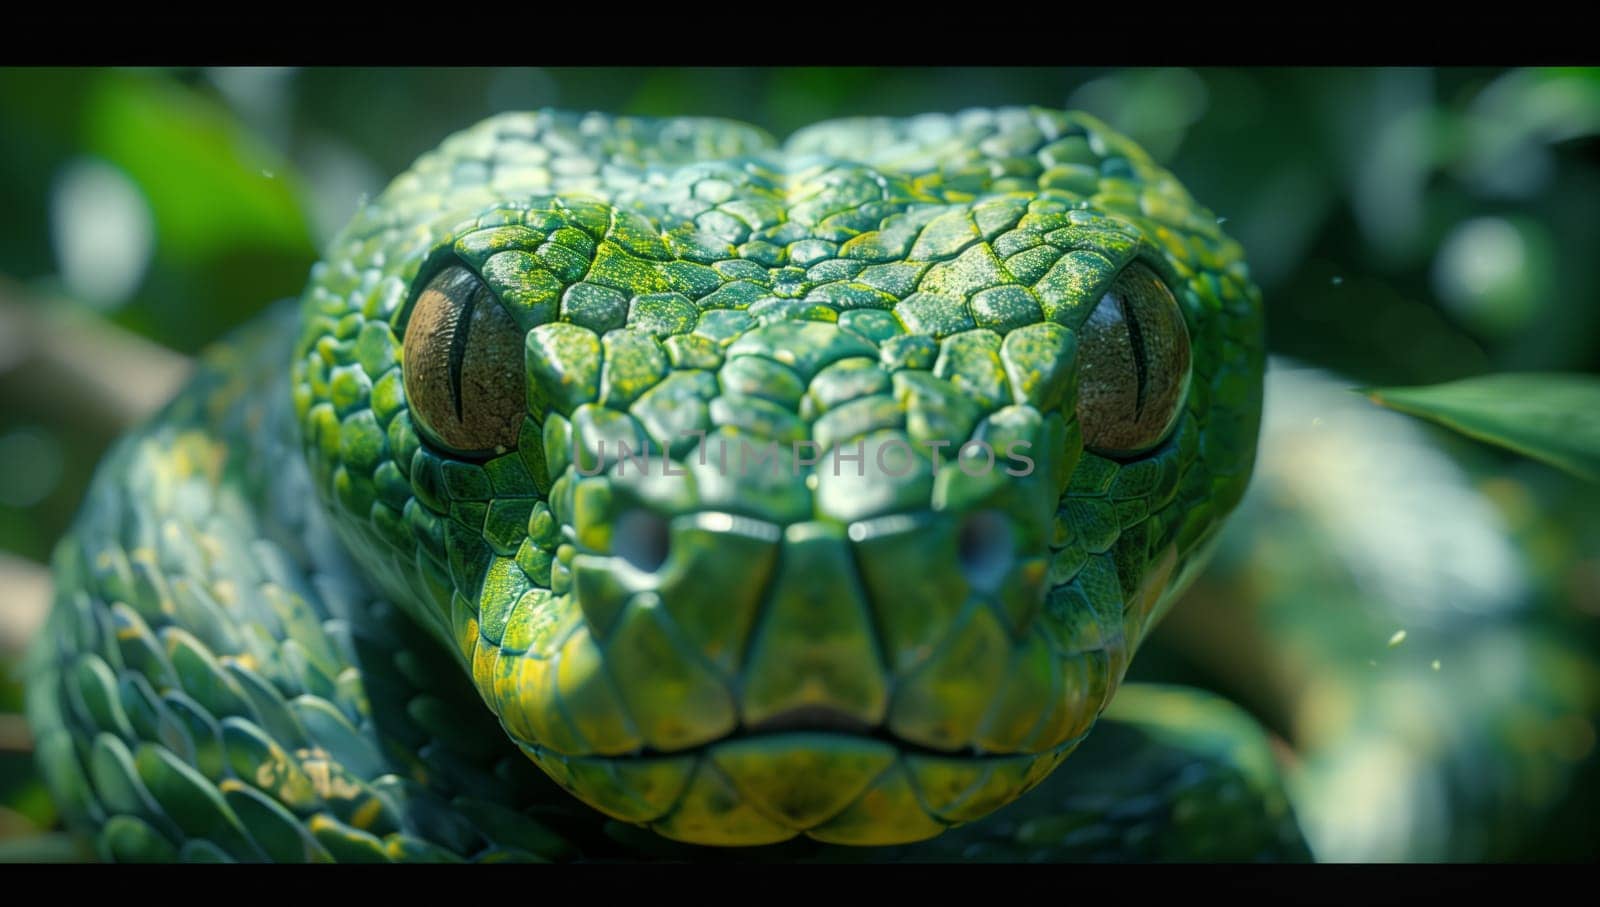 A closeup of a green snake staring at the camera, showcasing the symmetry and scaled reptile features. This macro photography captures the wildlife in its natural habitat